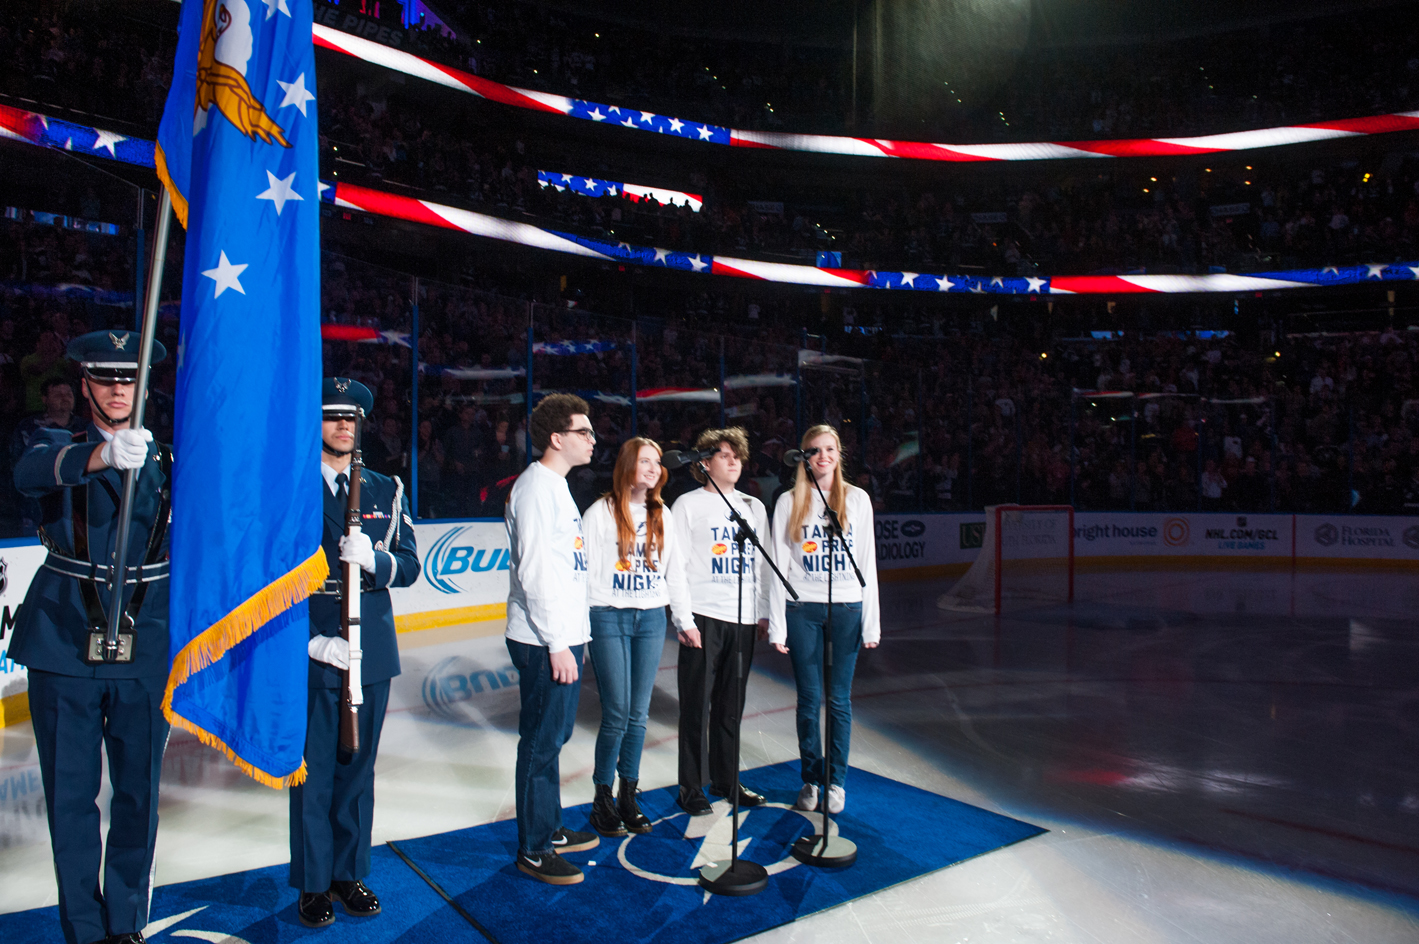 Tampa Prep students perform "The Star Spangled Banner."